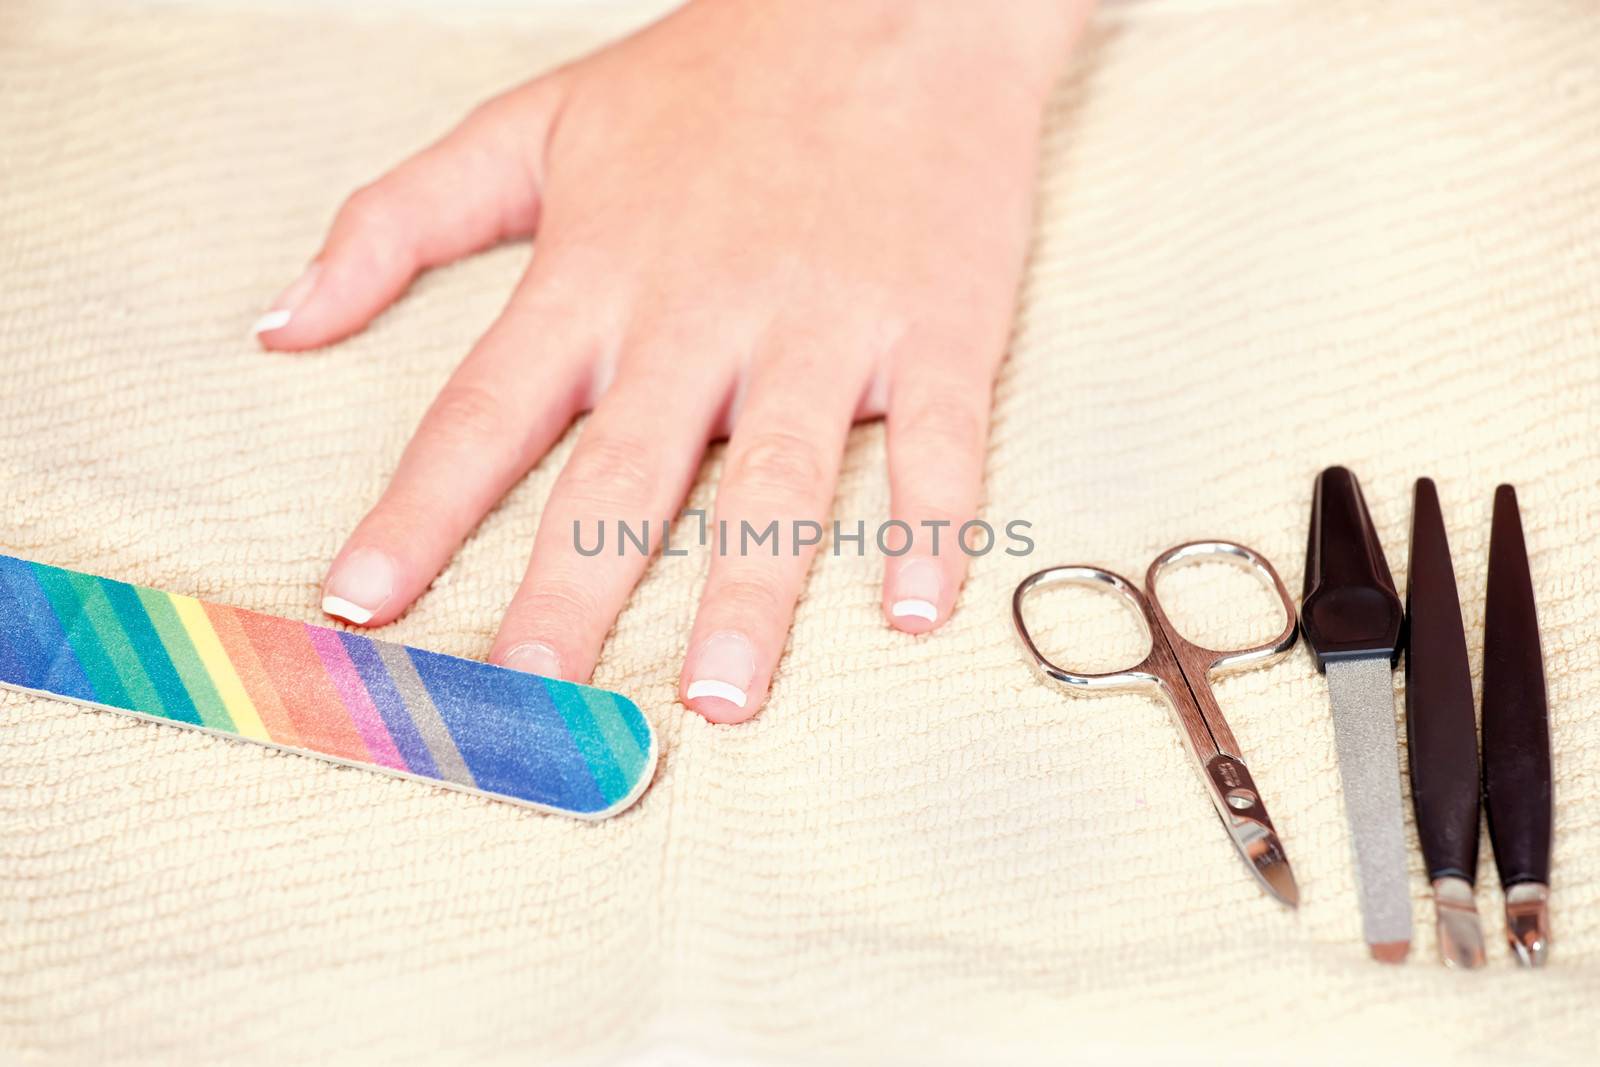 Nails beauty treatment with nail file